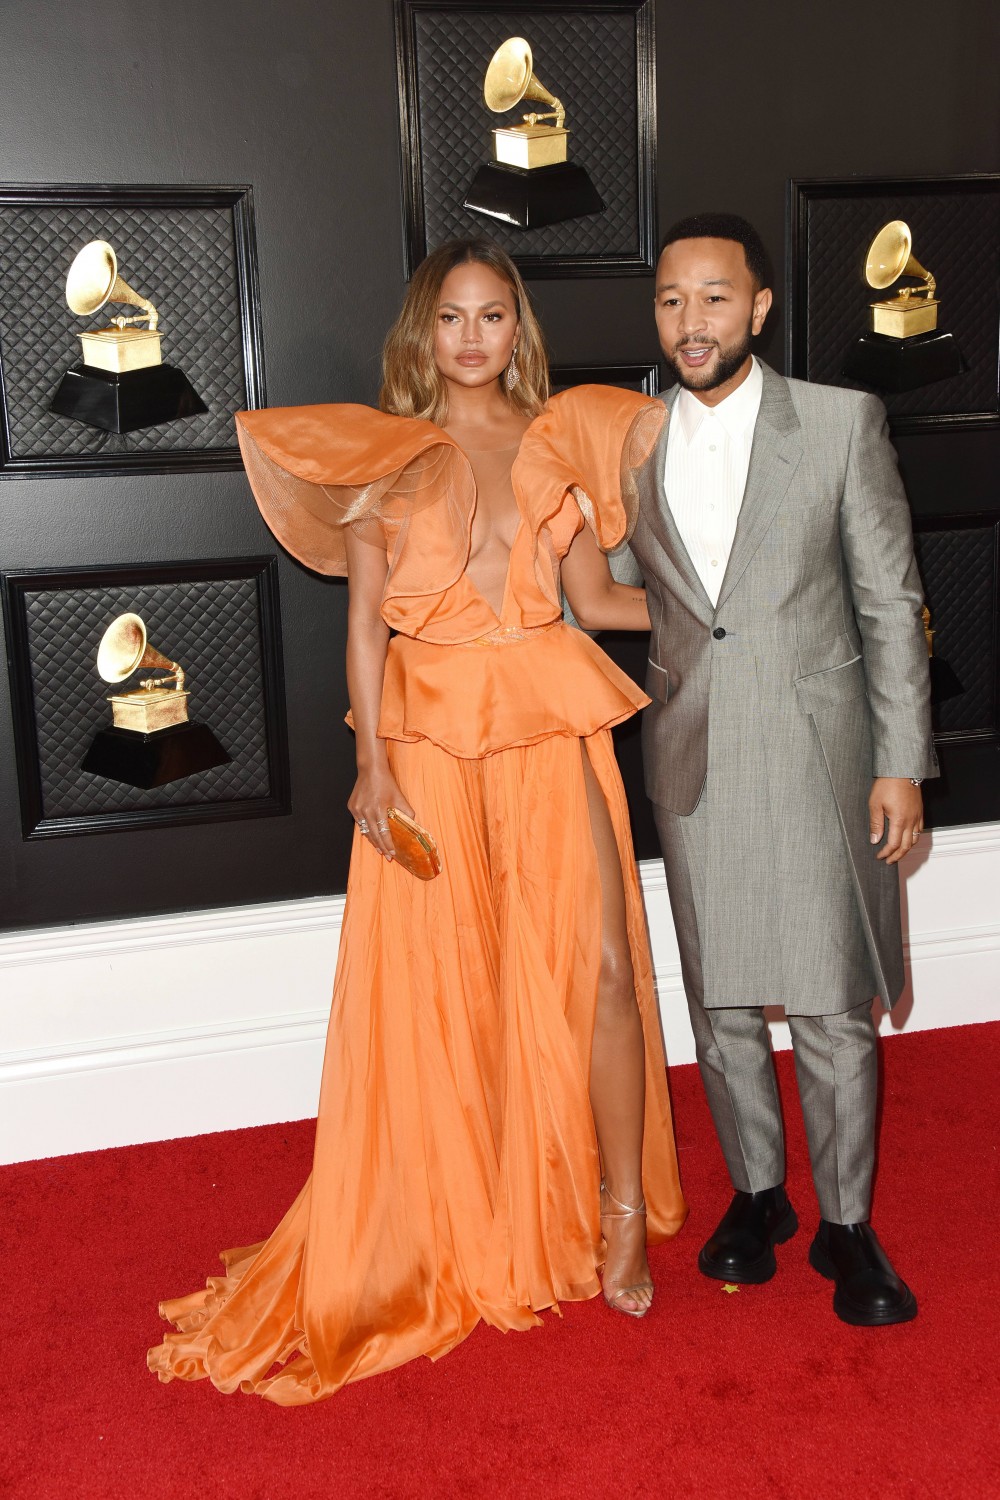 Chrissy Teigen, John Legend arrives at the 62nd Annual GRAMMY Awards at Staples Center on January 26, 2020 in Los Angeles, California